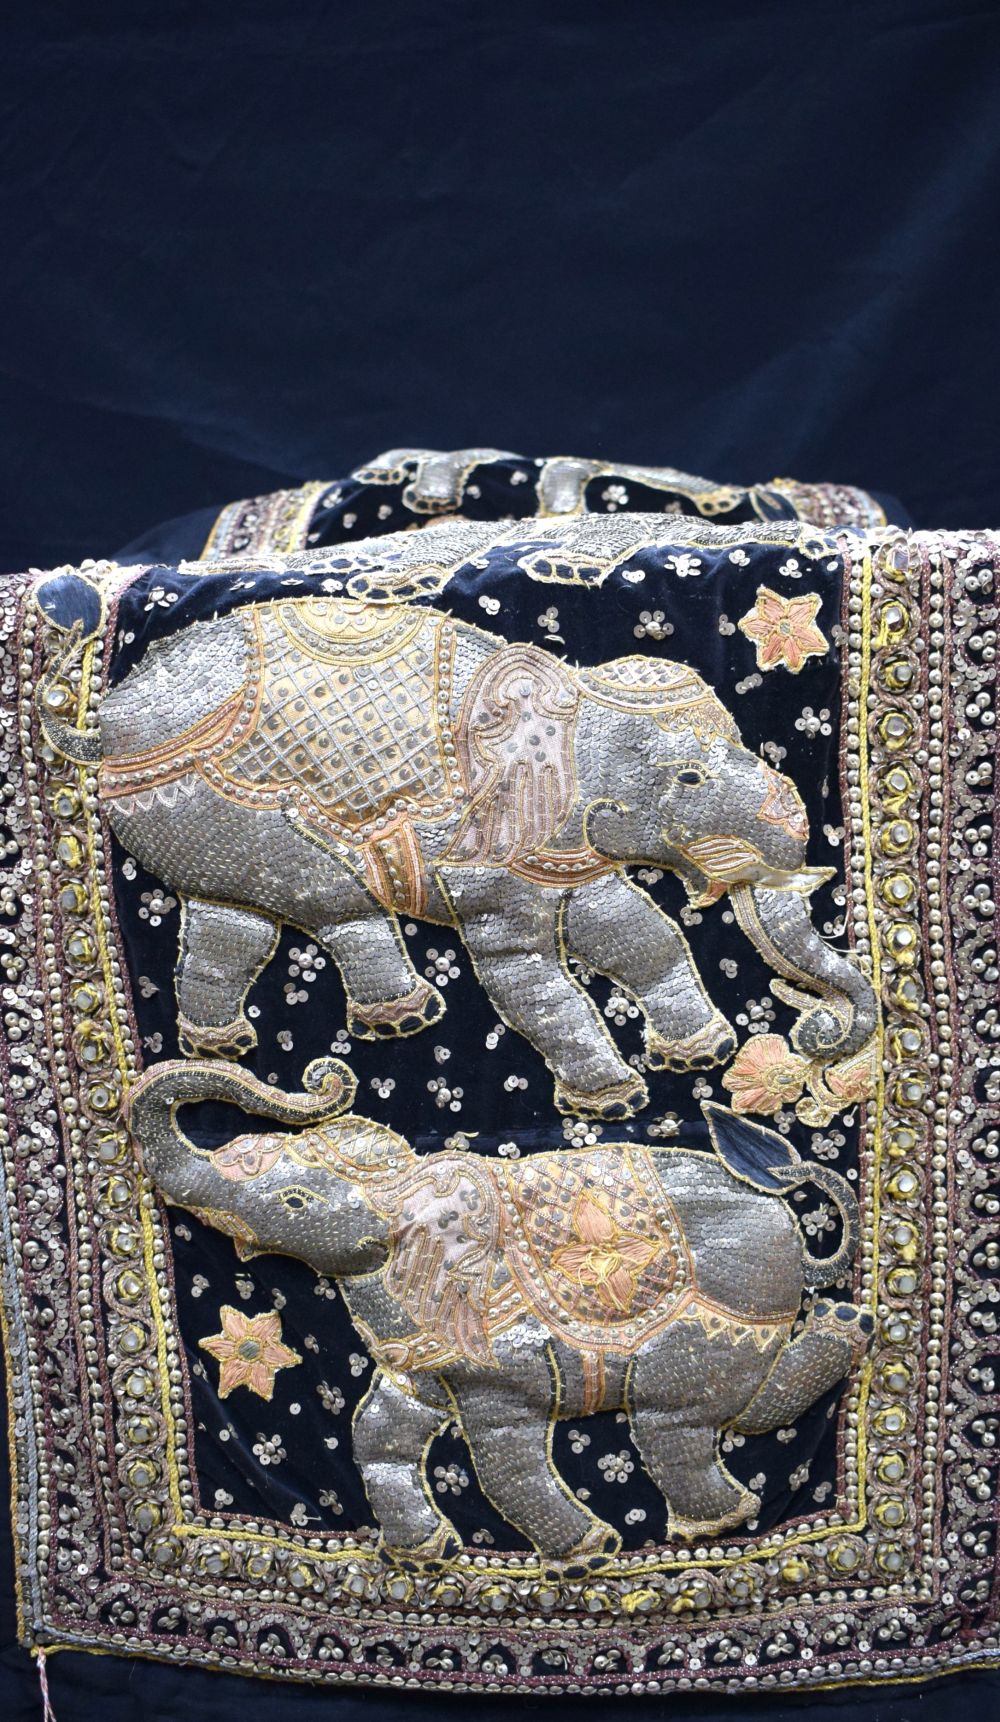 An Embroidered South East Asian Elephant wall hanging 104 x 60 cm. - Image 11 of 12